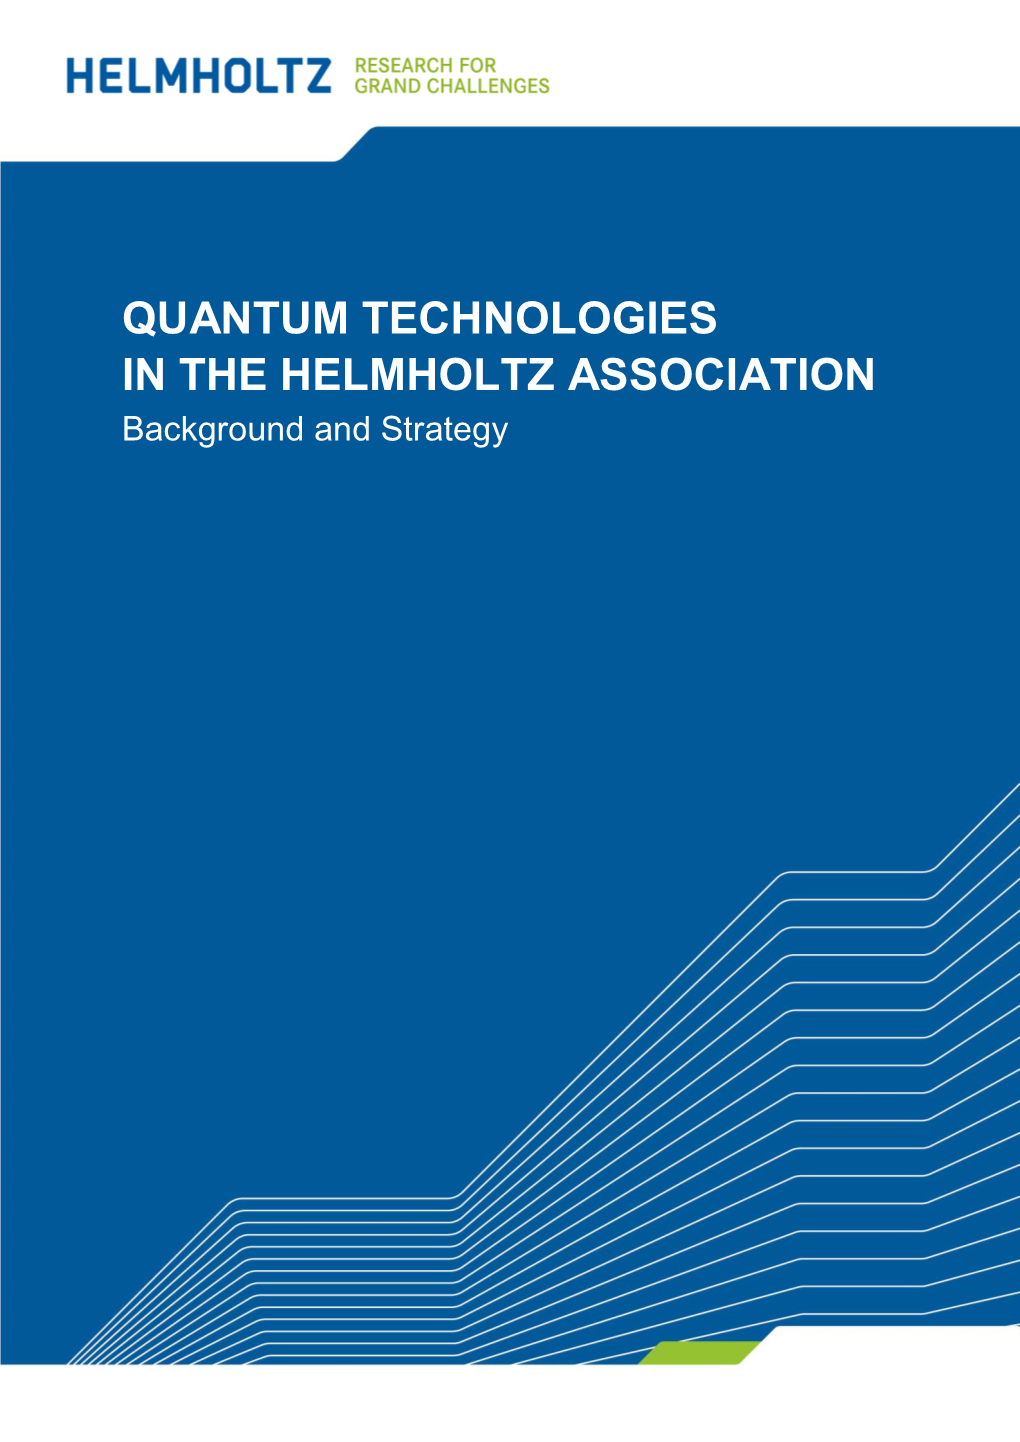 QUANTUM TECHNOLOGIES in the HELMHOLTZ ASSOCIATION Background and Strategy